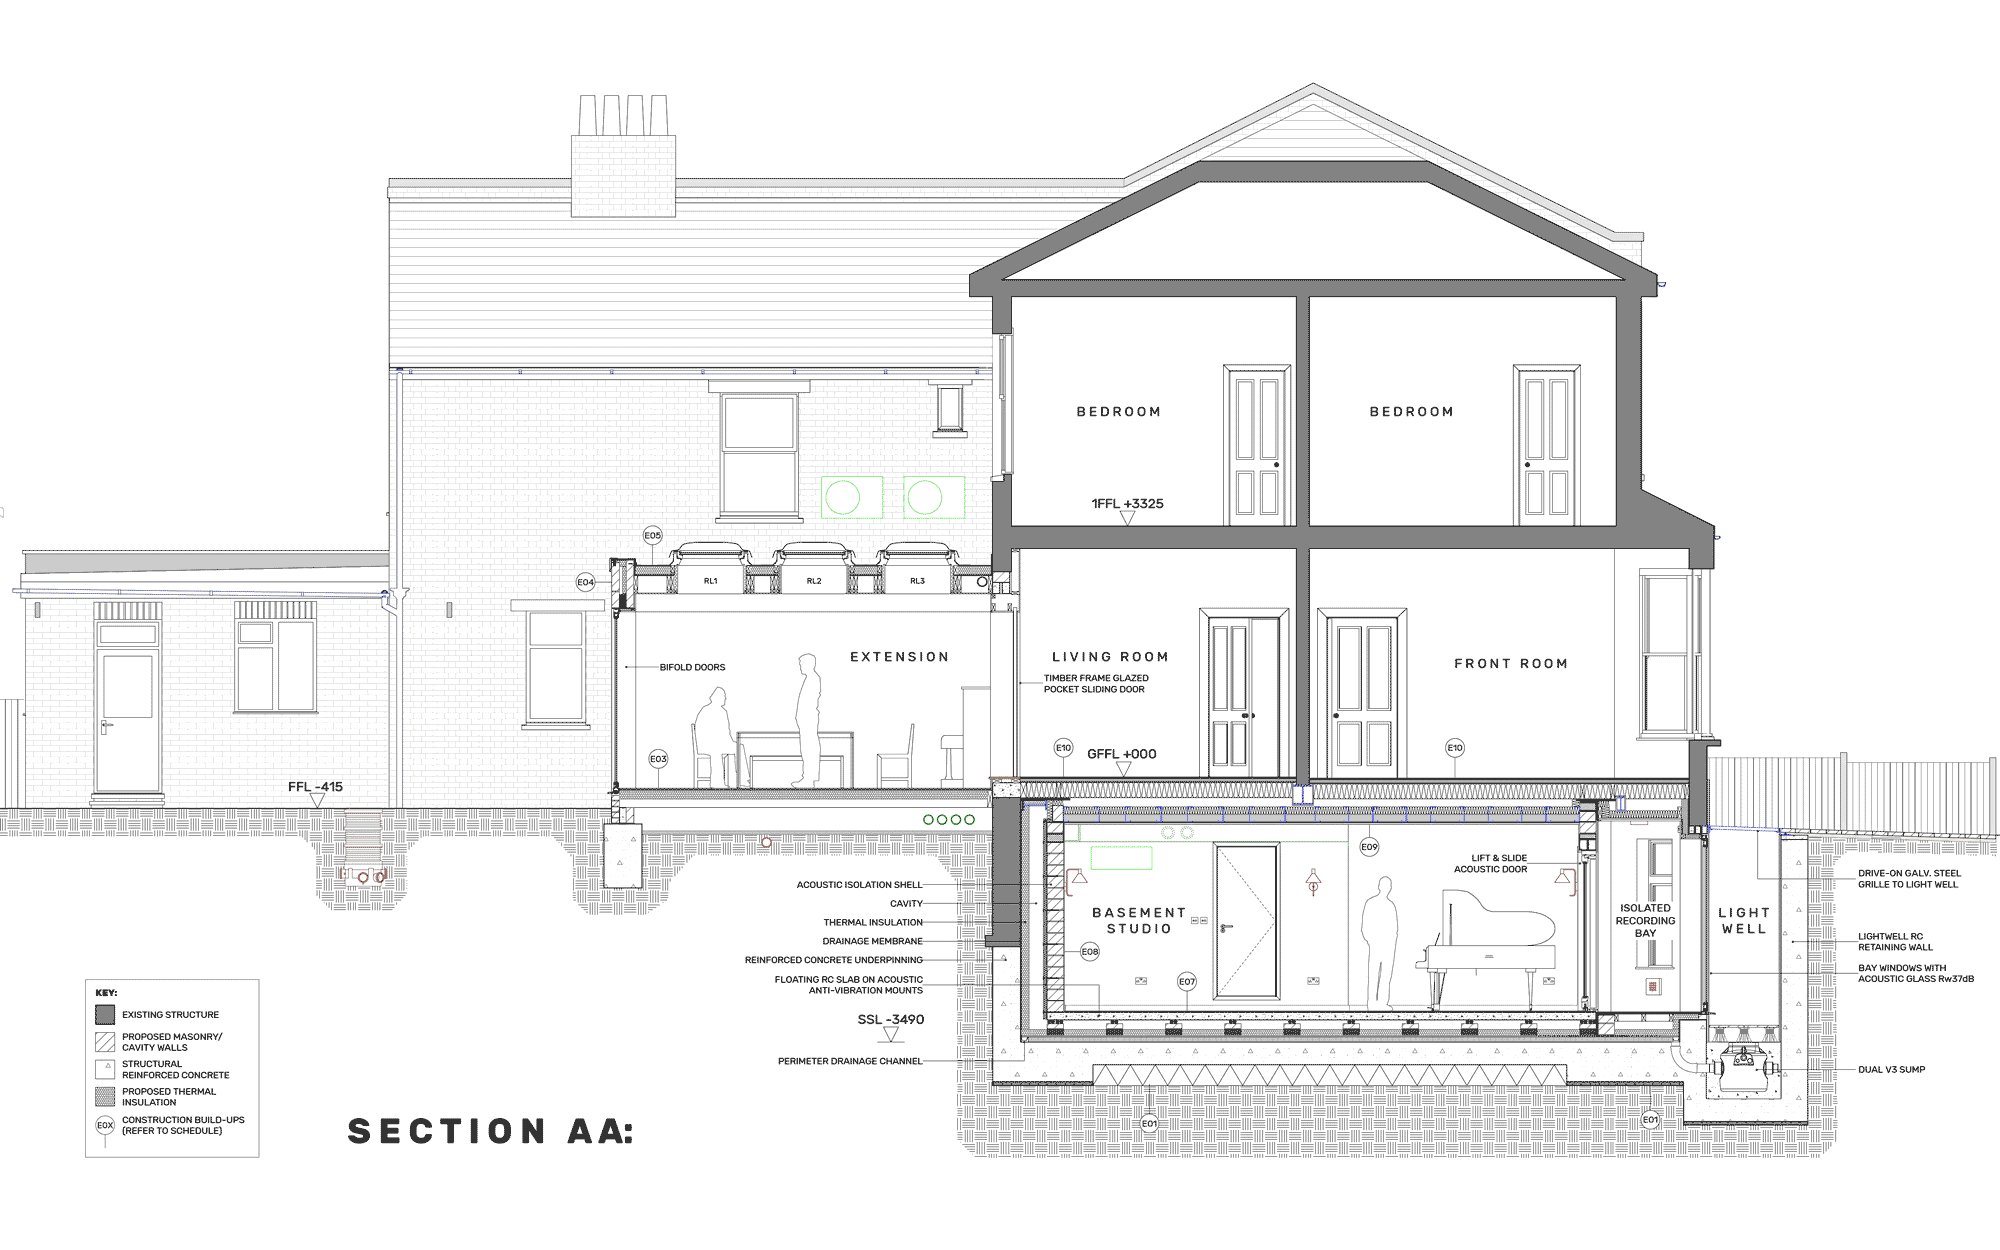 1 to 50 scale section drawing of basement studio and extension to Victorian house